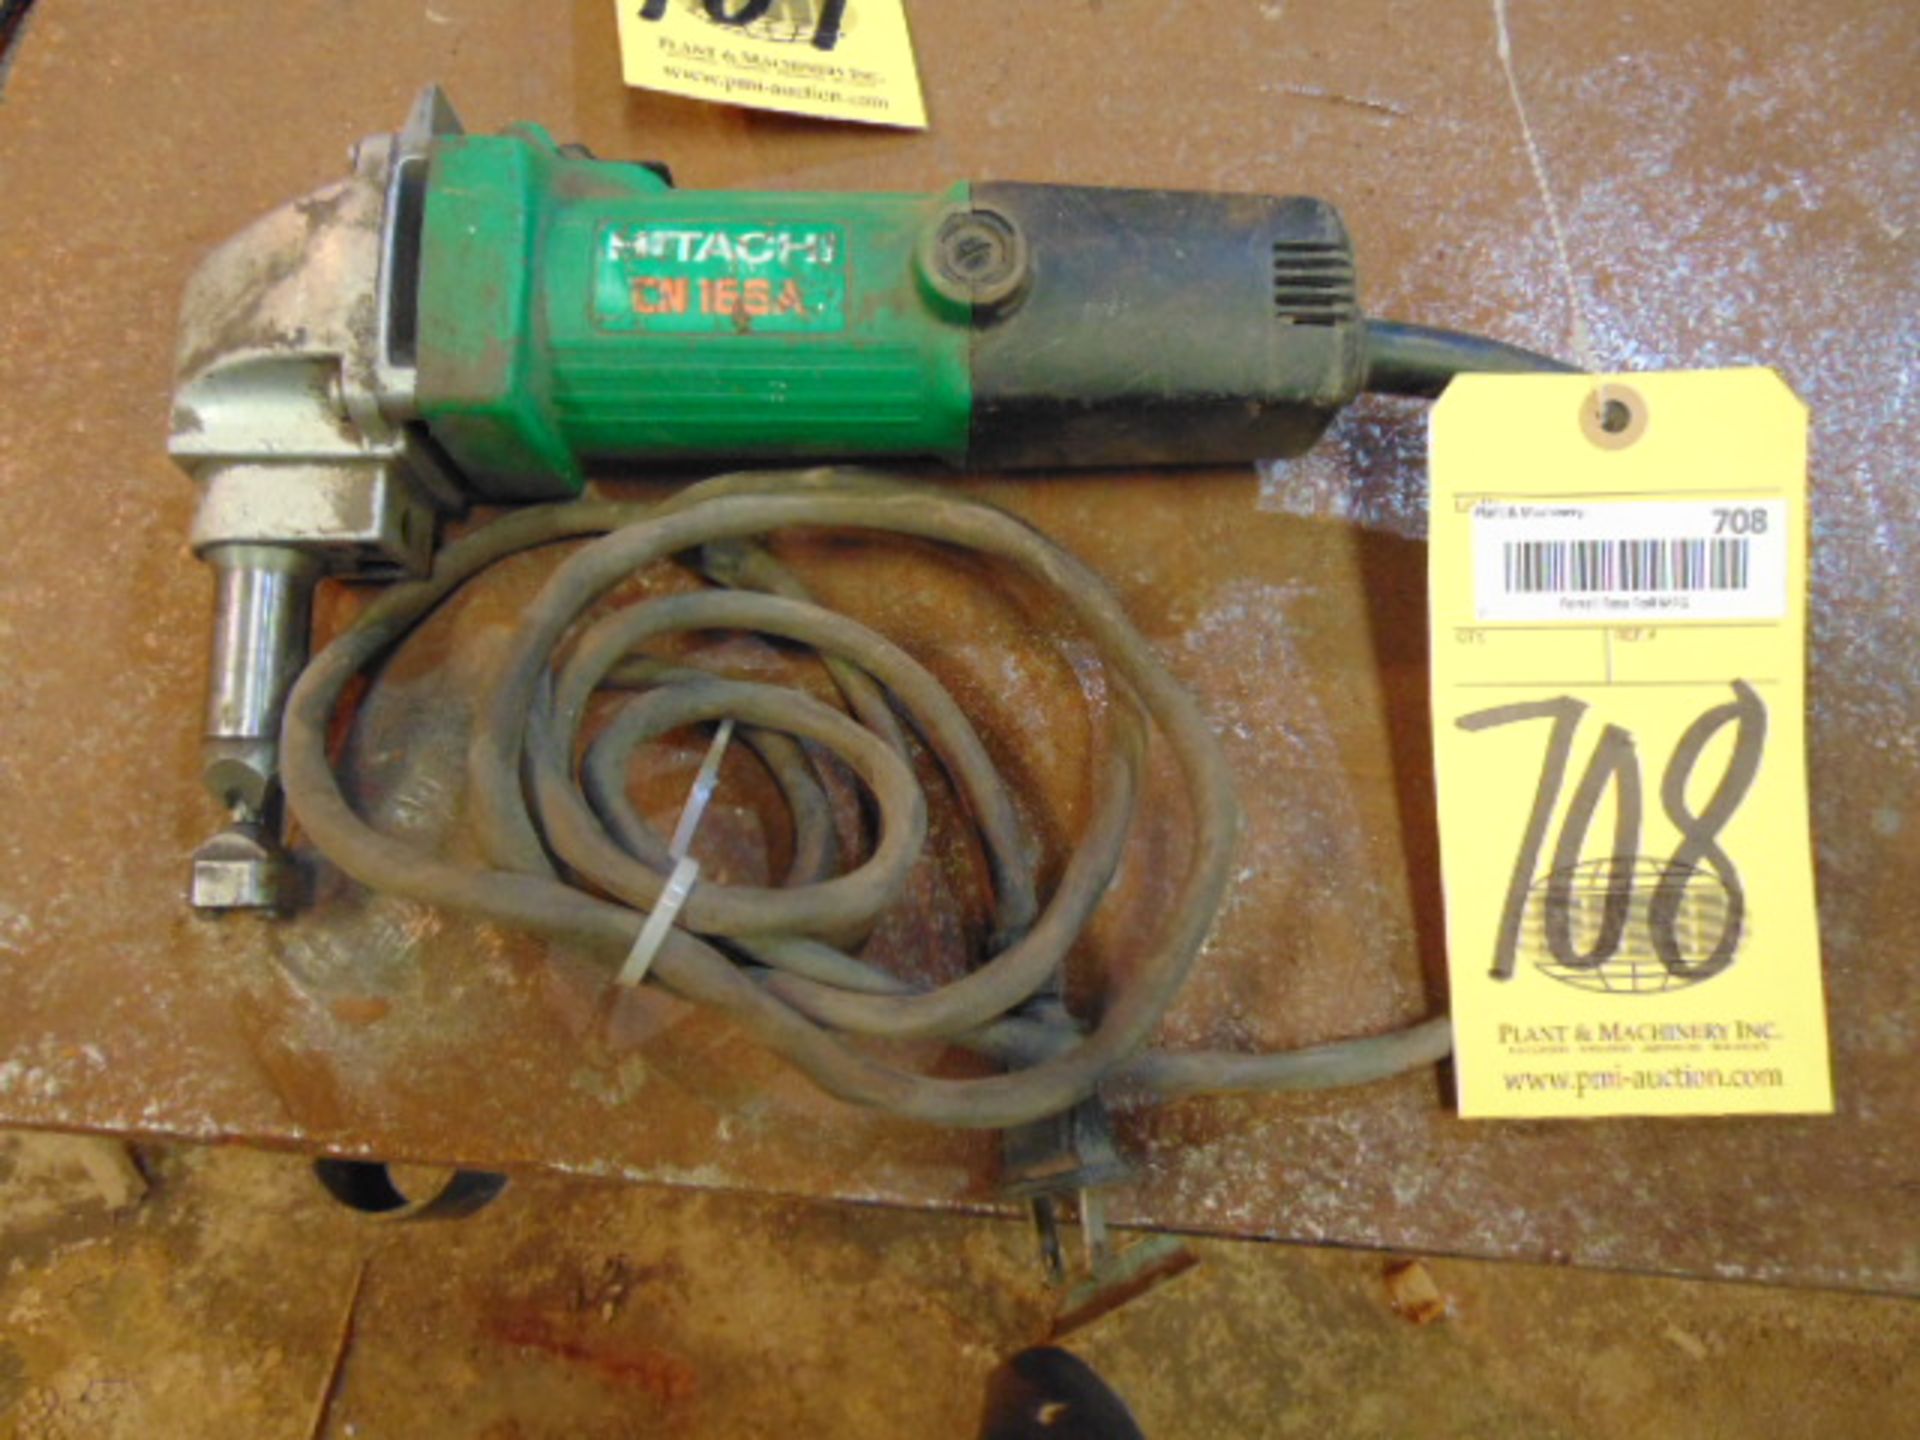 ELECTRIC HAND NIBBLER, HITACHI (Located at: Gearn, 3375 US-60, Hereford, TX 79045)